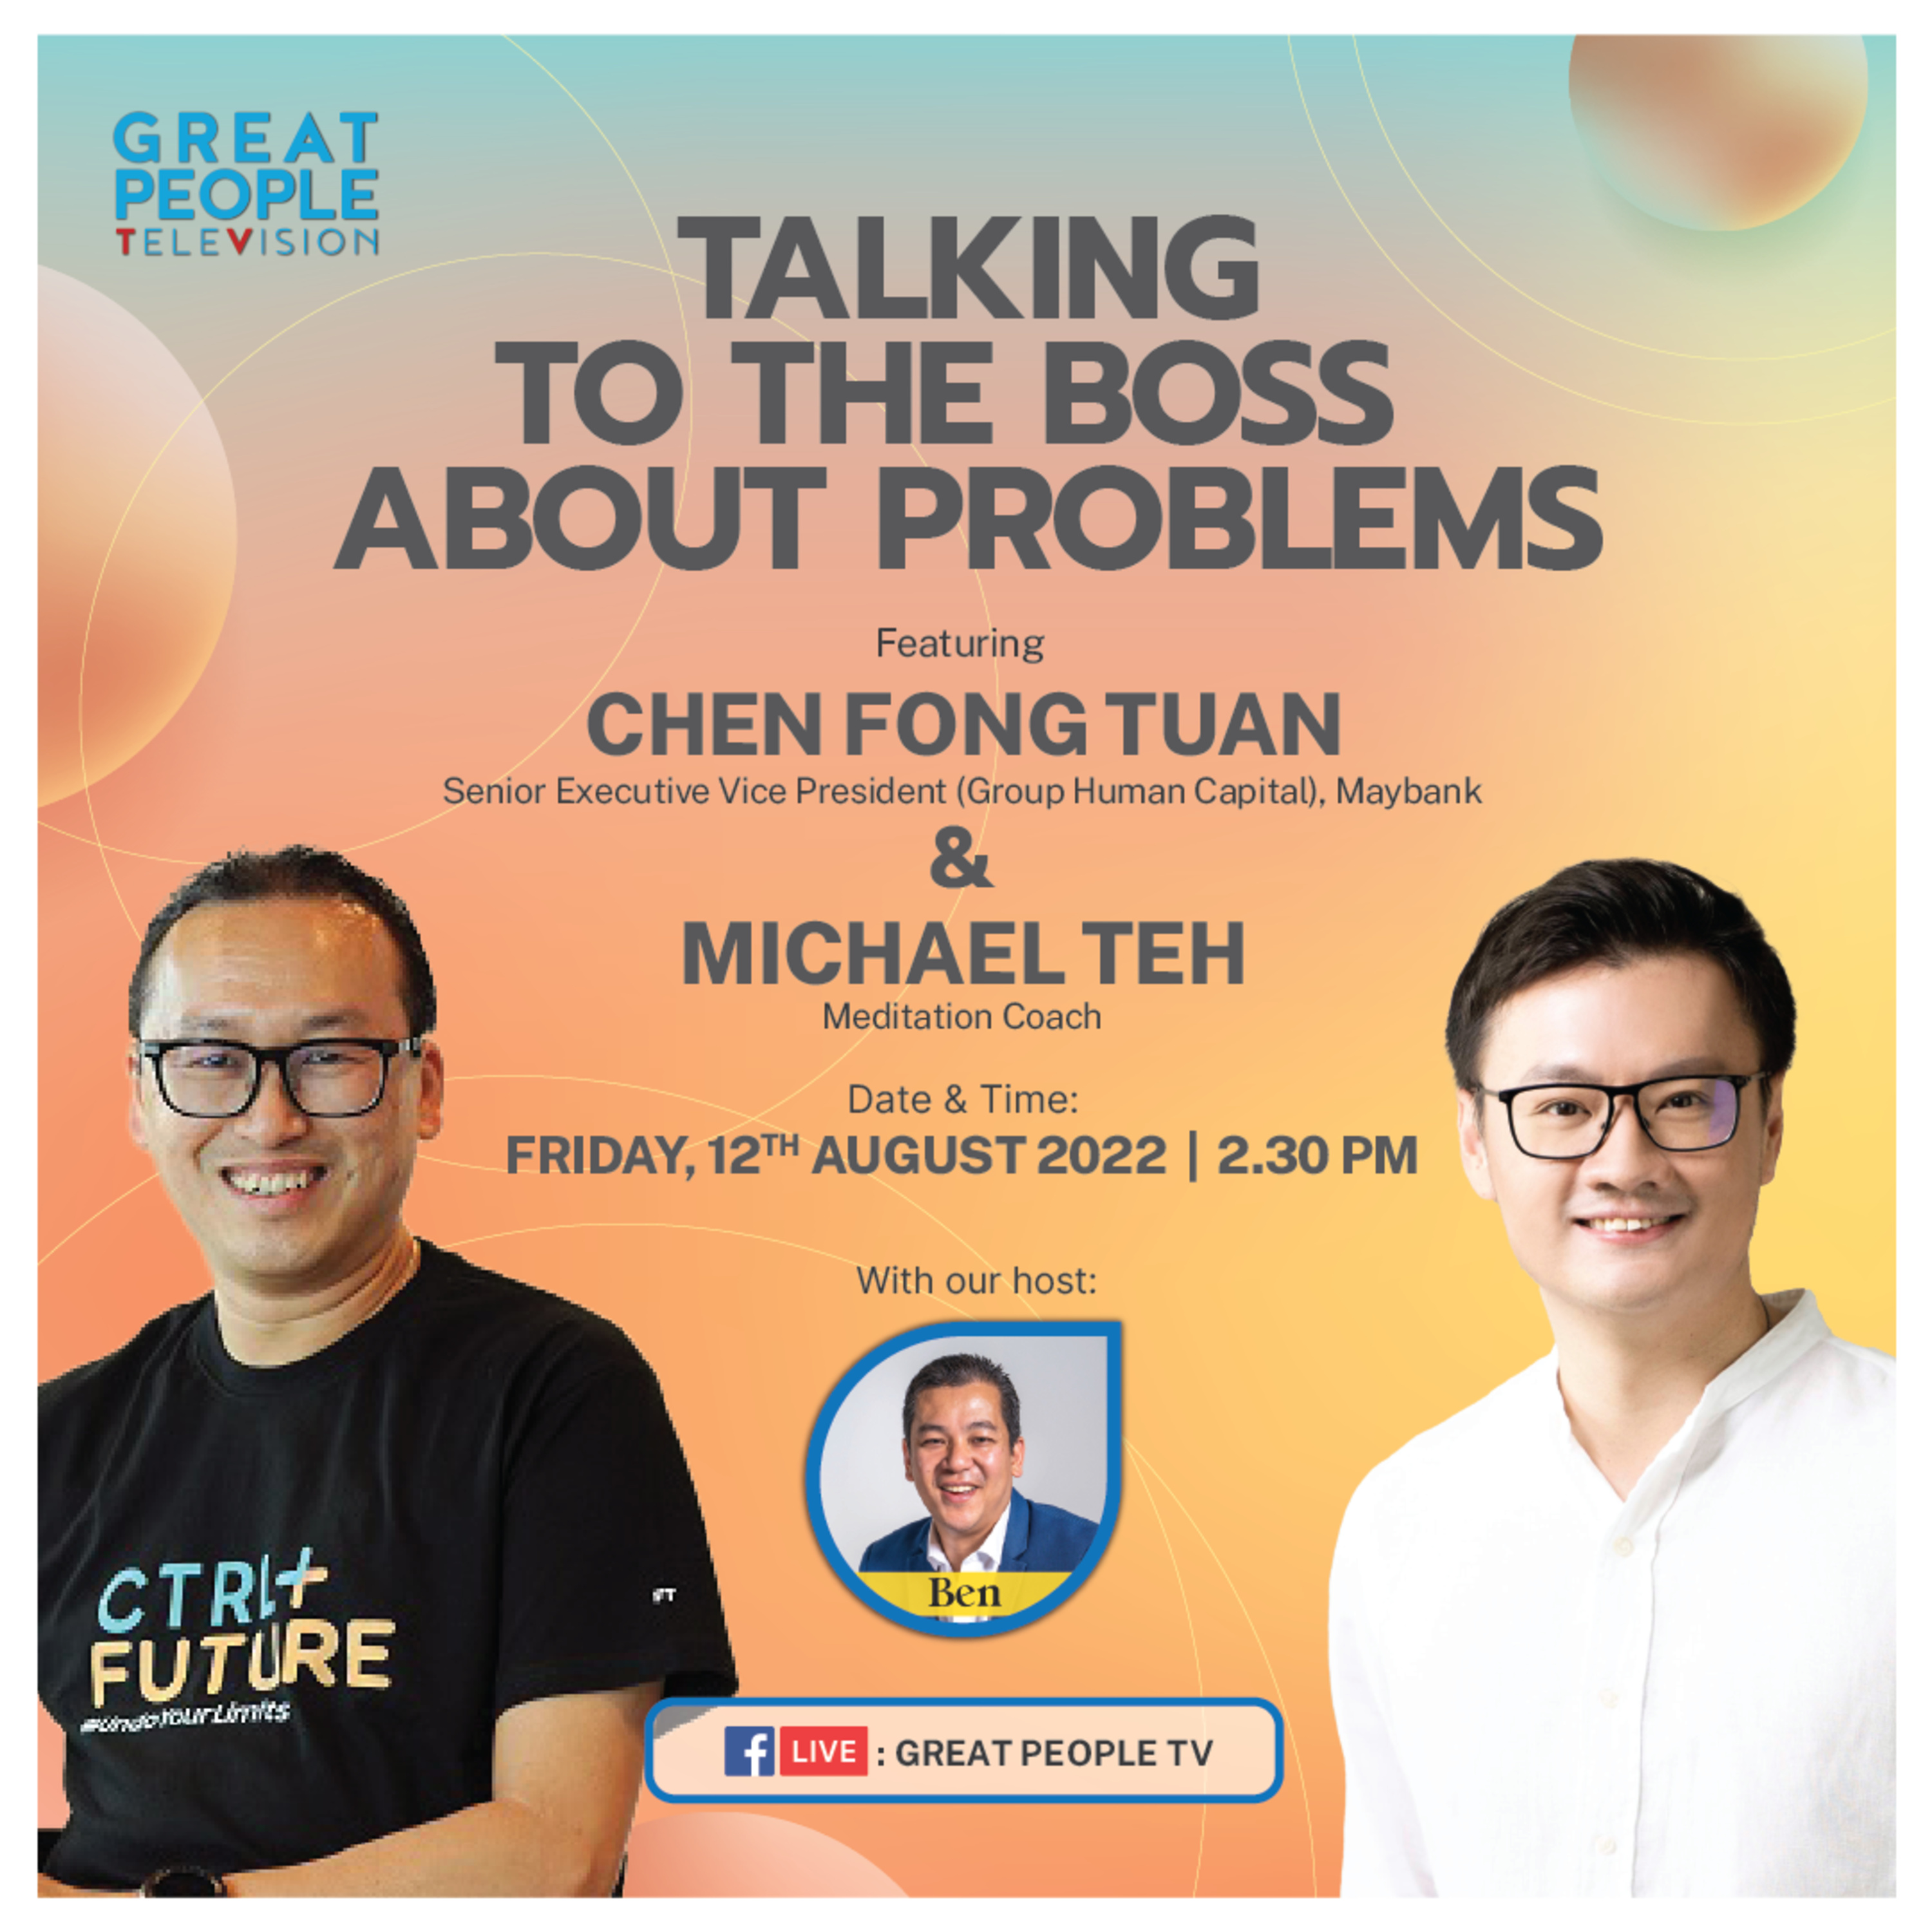 Talking To The Boss About Problems - Chen Fong Tuan & Michael Teh